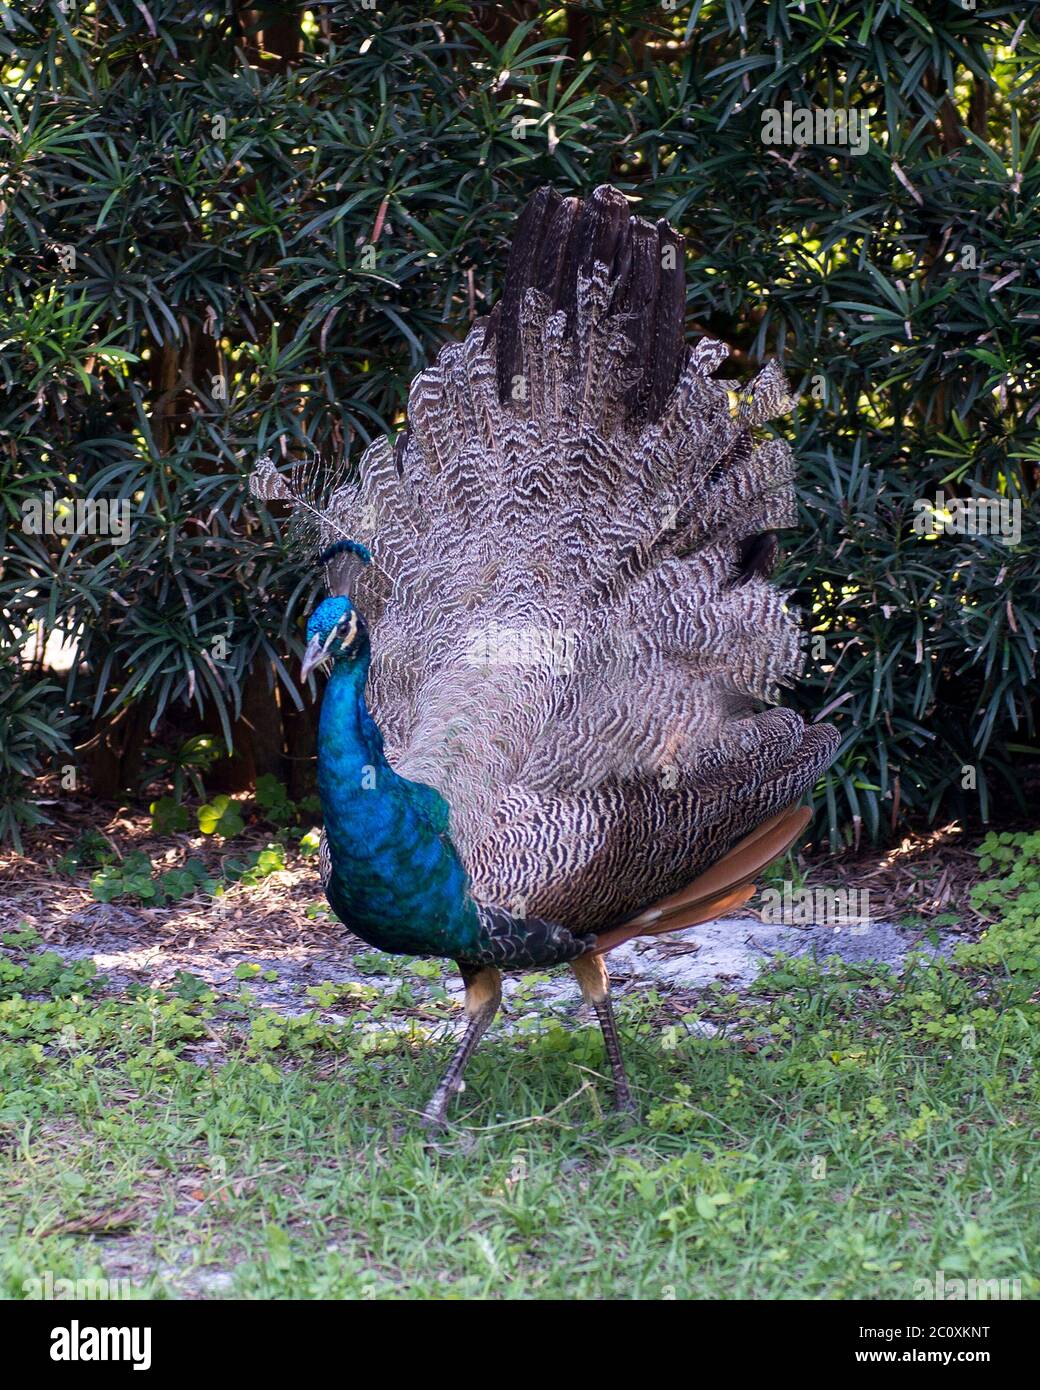 Peacock young bird displaying fan tail, the beautiful colorful bird with a foliage background and ground in its environment and surrounding. Stock Photo